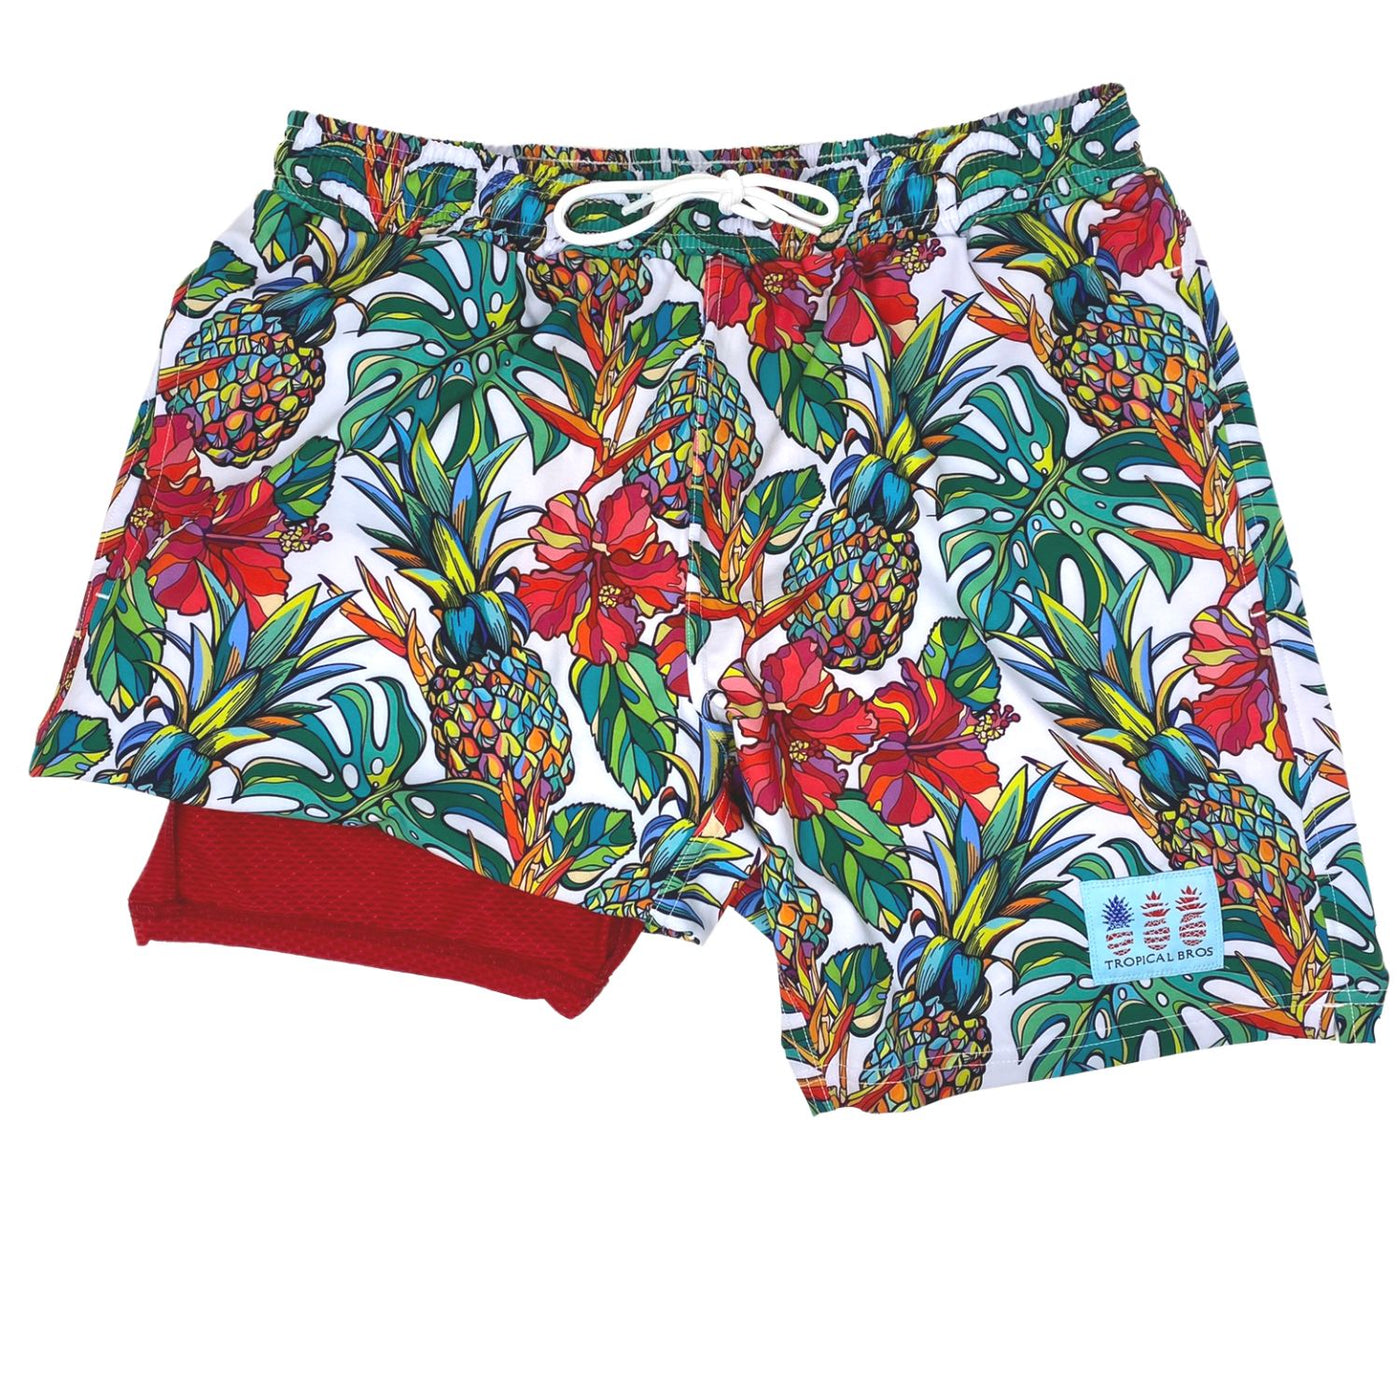 Pineapple Vibes Swimsuit Shorts